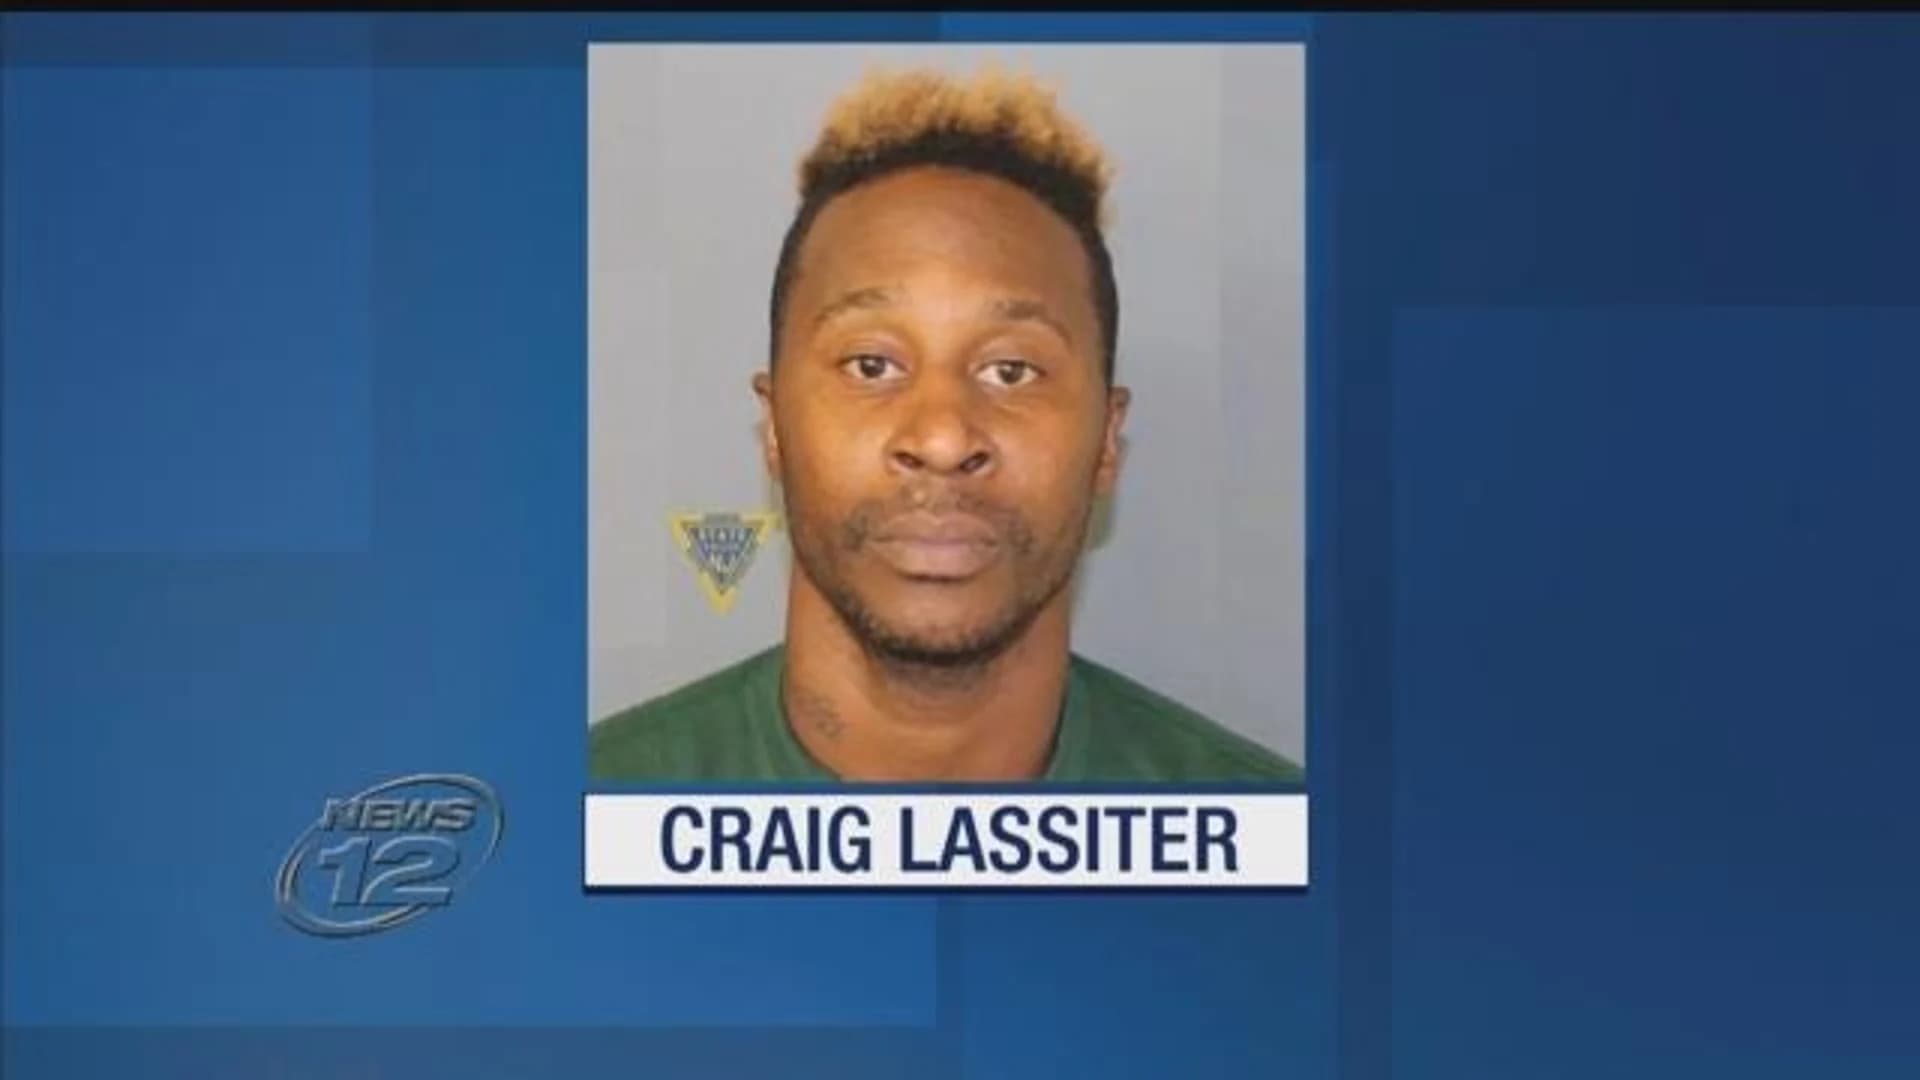 Man accused of assaulting 2 girls in NJ arrested on LI